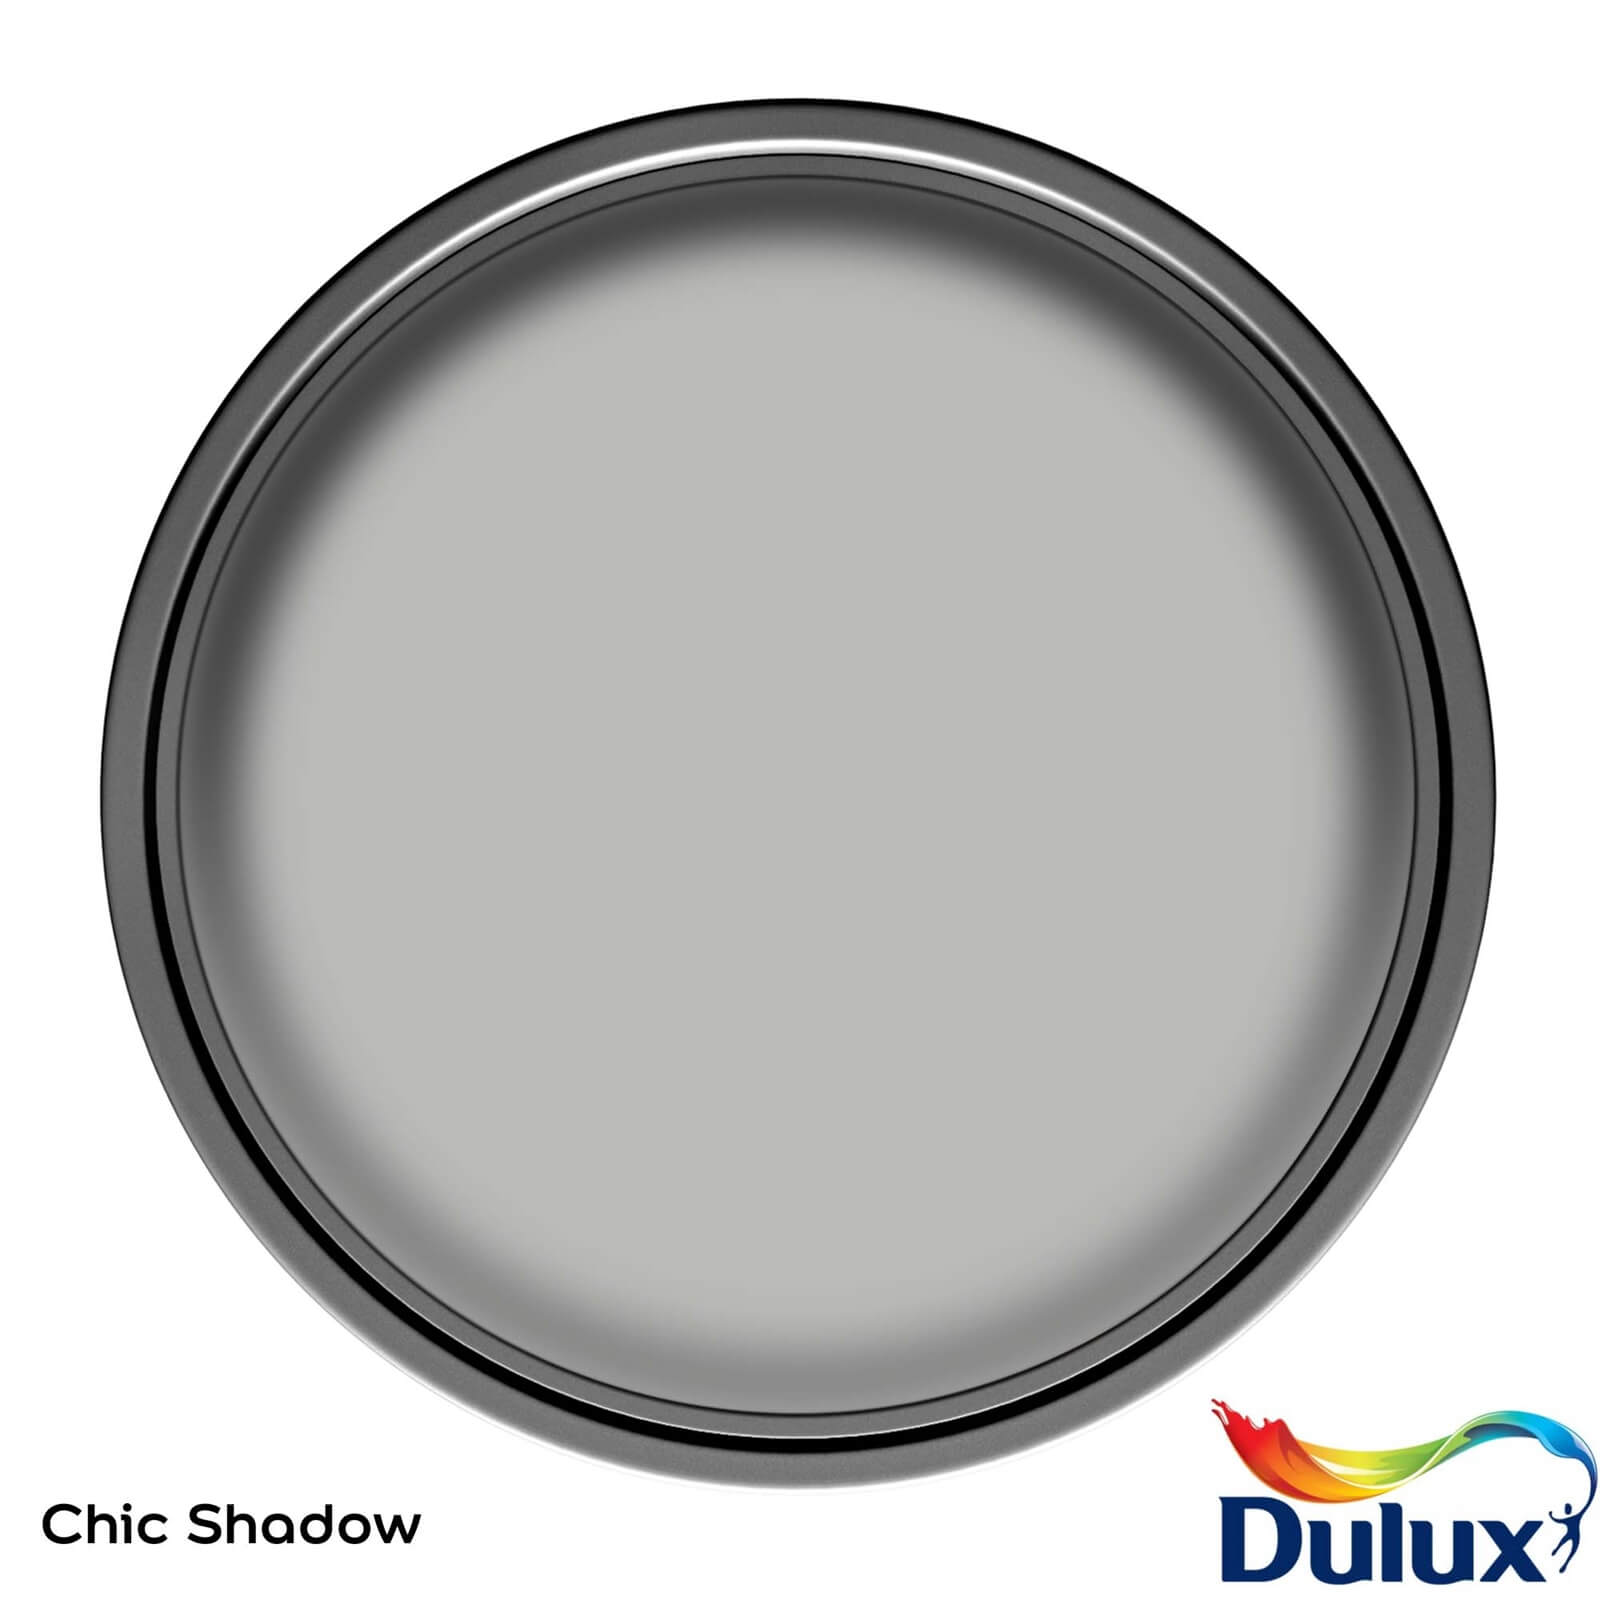 Dulux Quick Dry Gloss Chic Shadow - 750ml